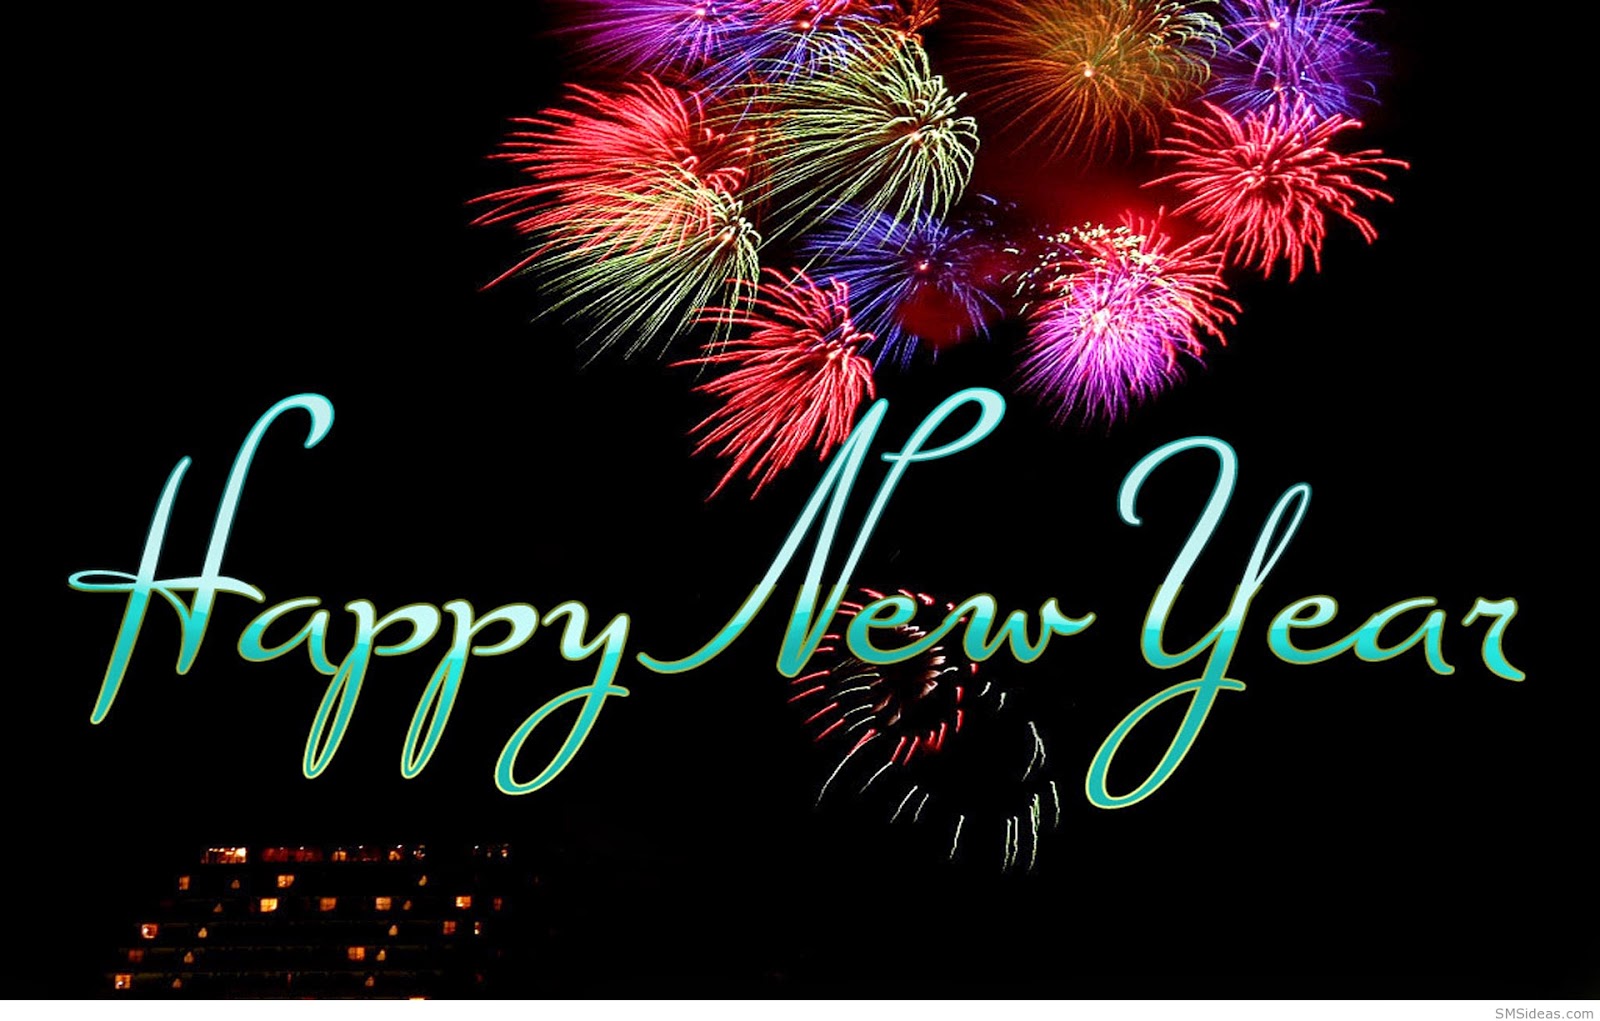 Happy New Year 2019 Images Wallpapers   New Year Pictures